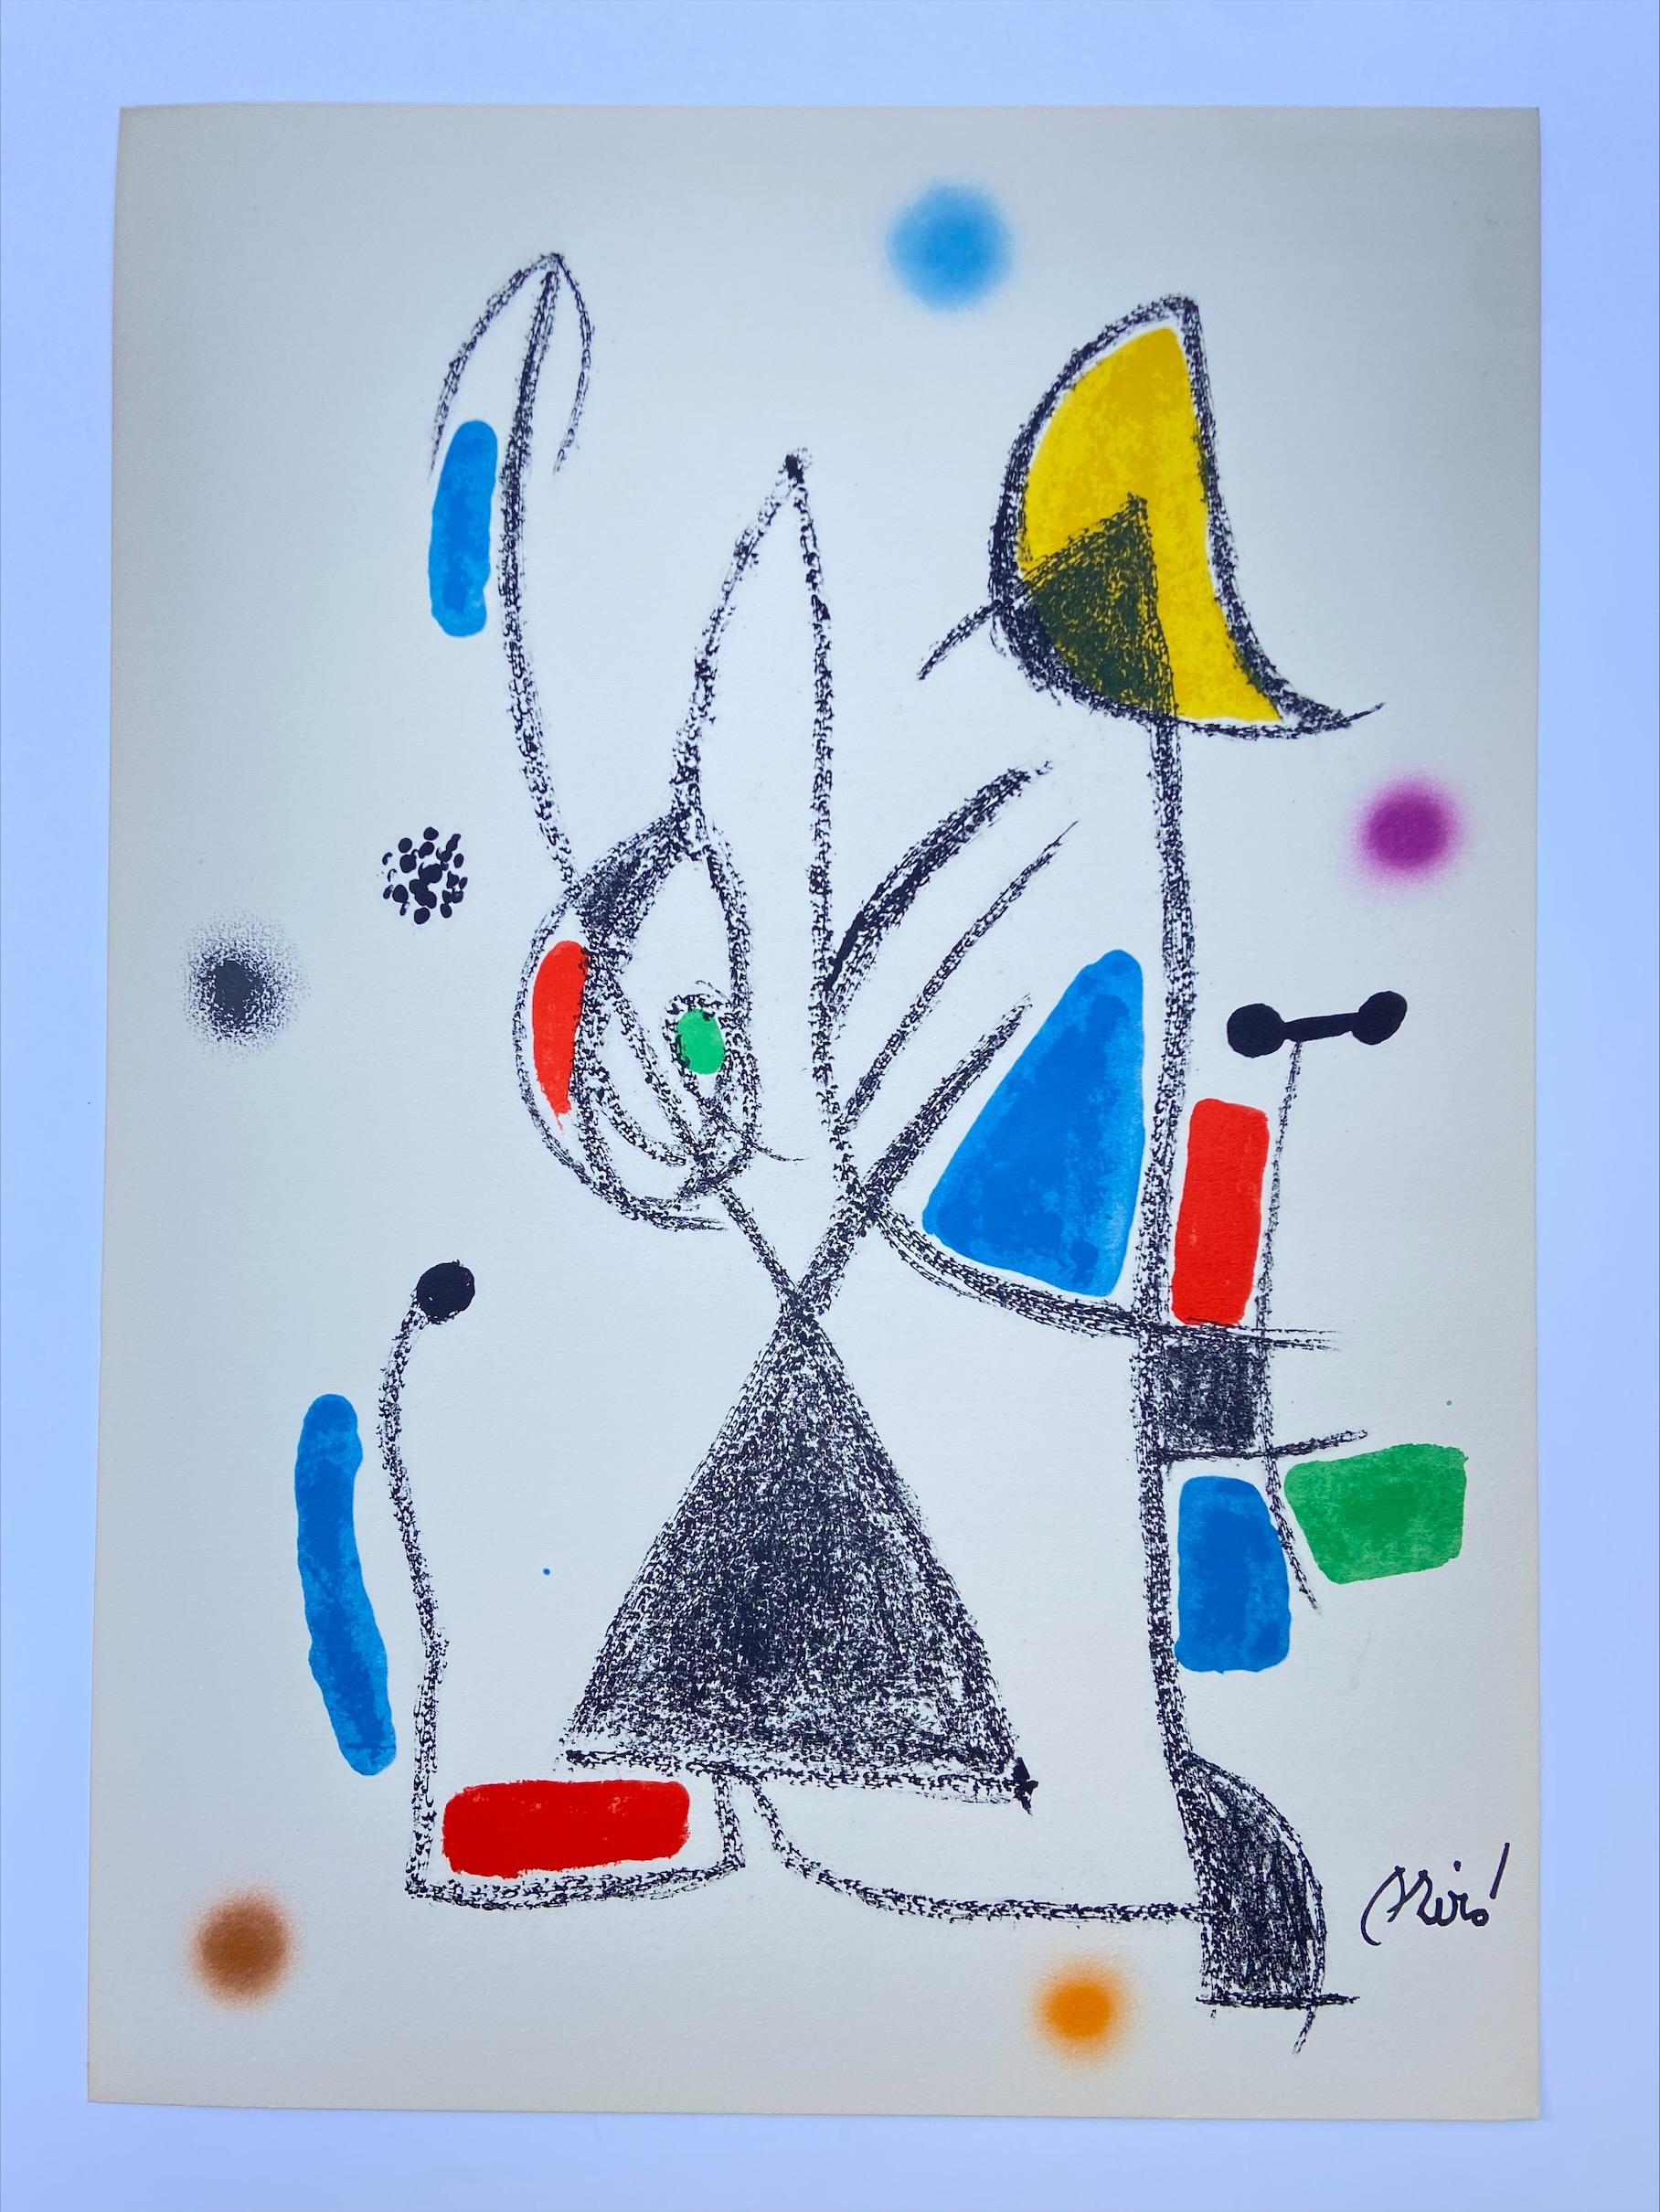 Joan Miró - Maravillas con variaciones n-16
Lithography 
35,7x49,6cm
Signed in the plate 
1975
Edition of 1500 copies on Guarro paper
Publisher : Poligrafa Barcelona 
890€